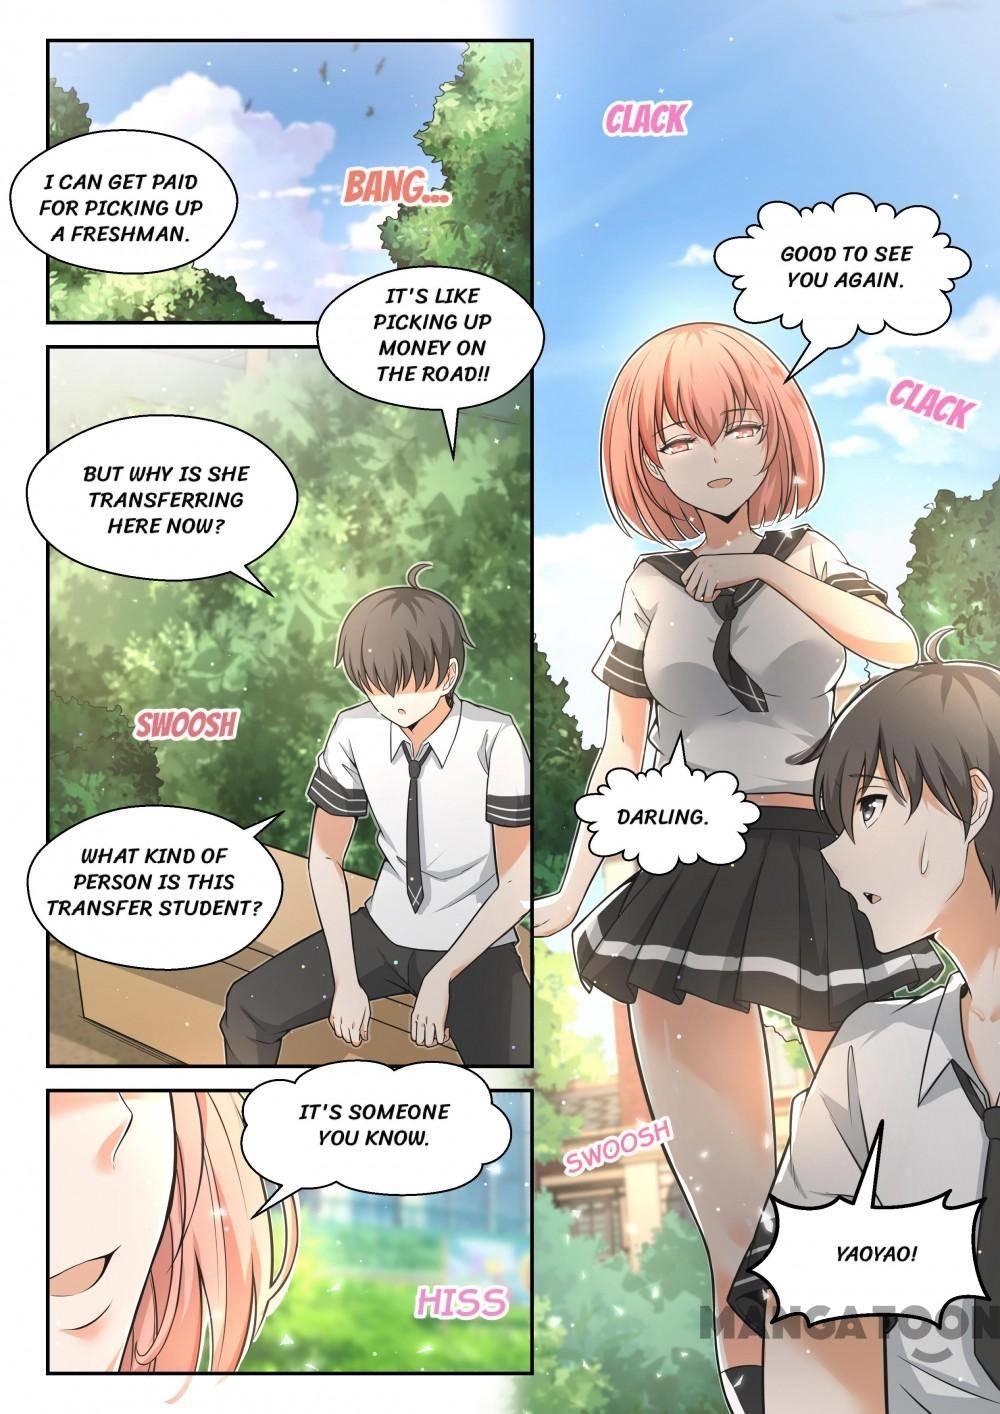 The Boy In The All-Girls School Chapter 473 page 4 - Mangakakalot